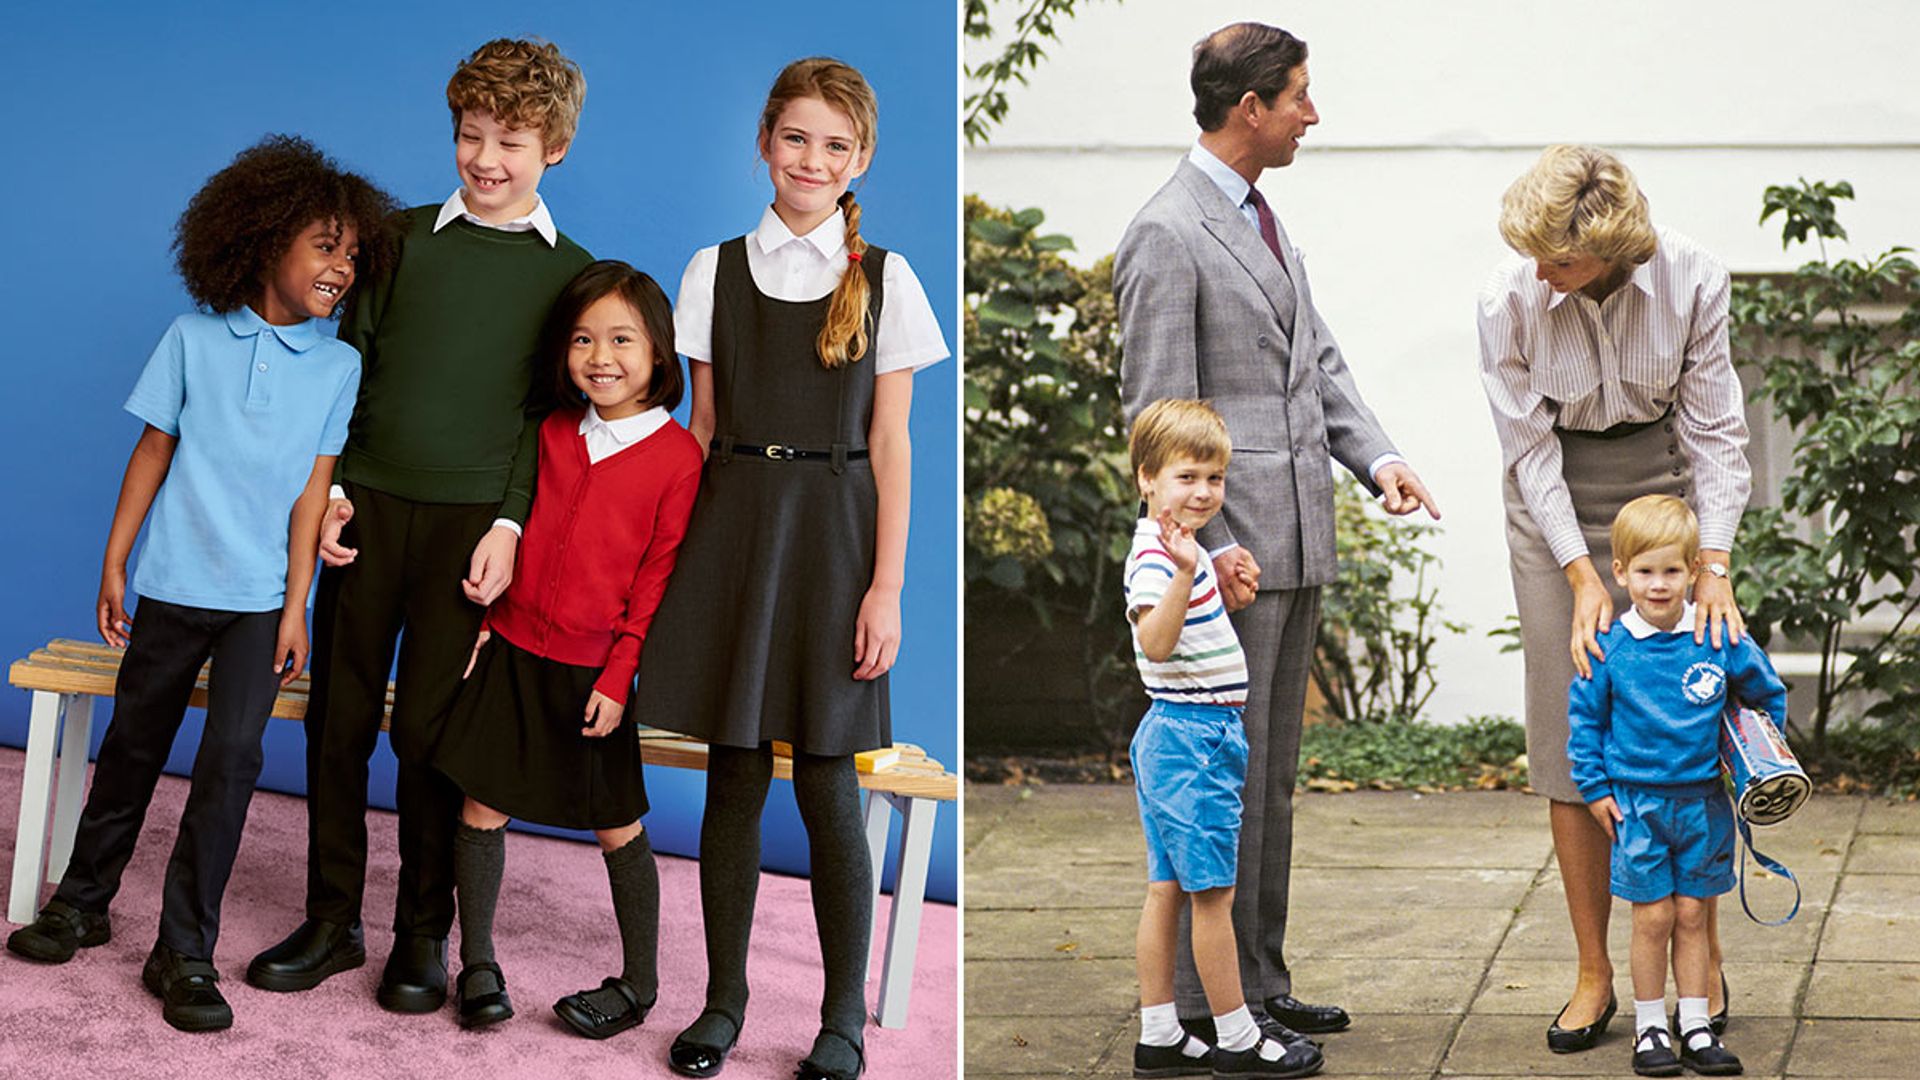 Win a back to school photoshoot with Prince William and Harry's royal photographer!